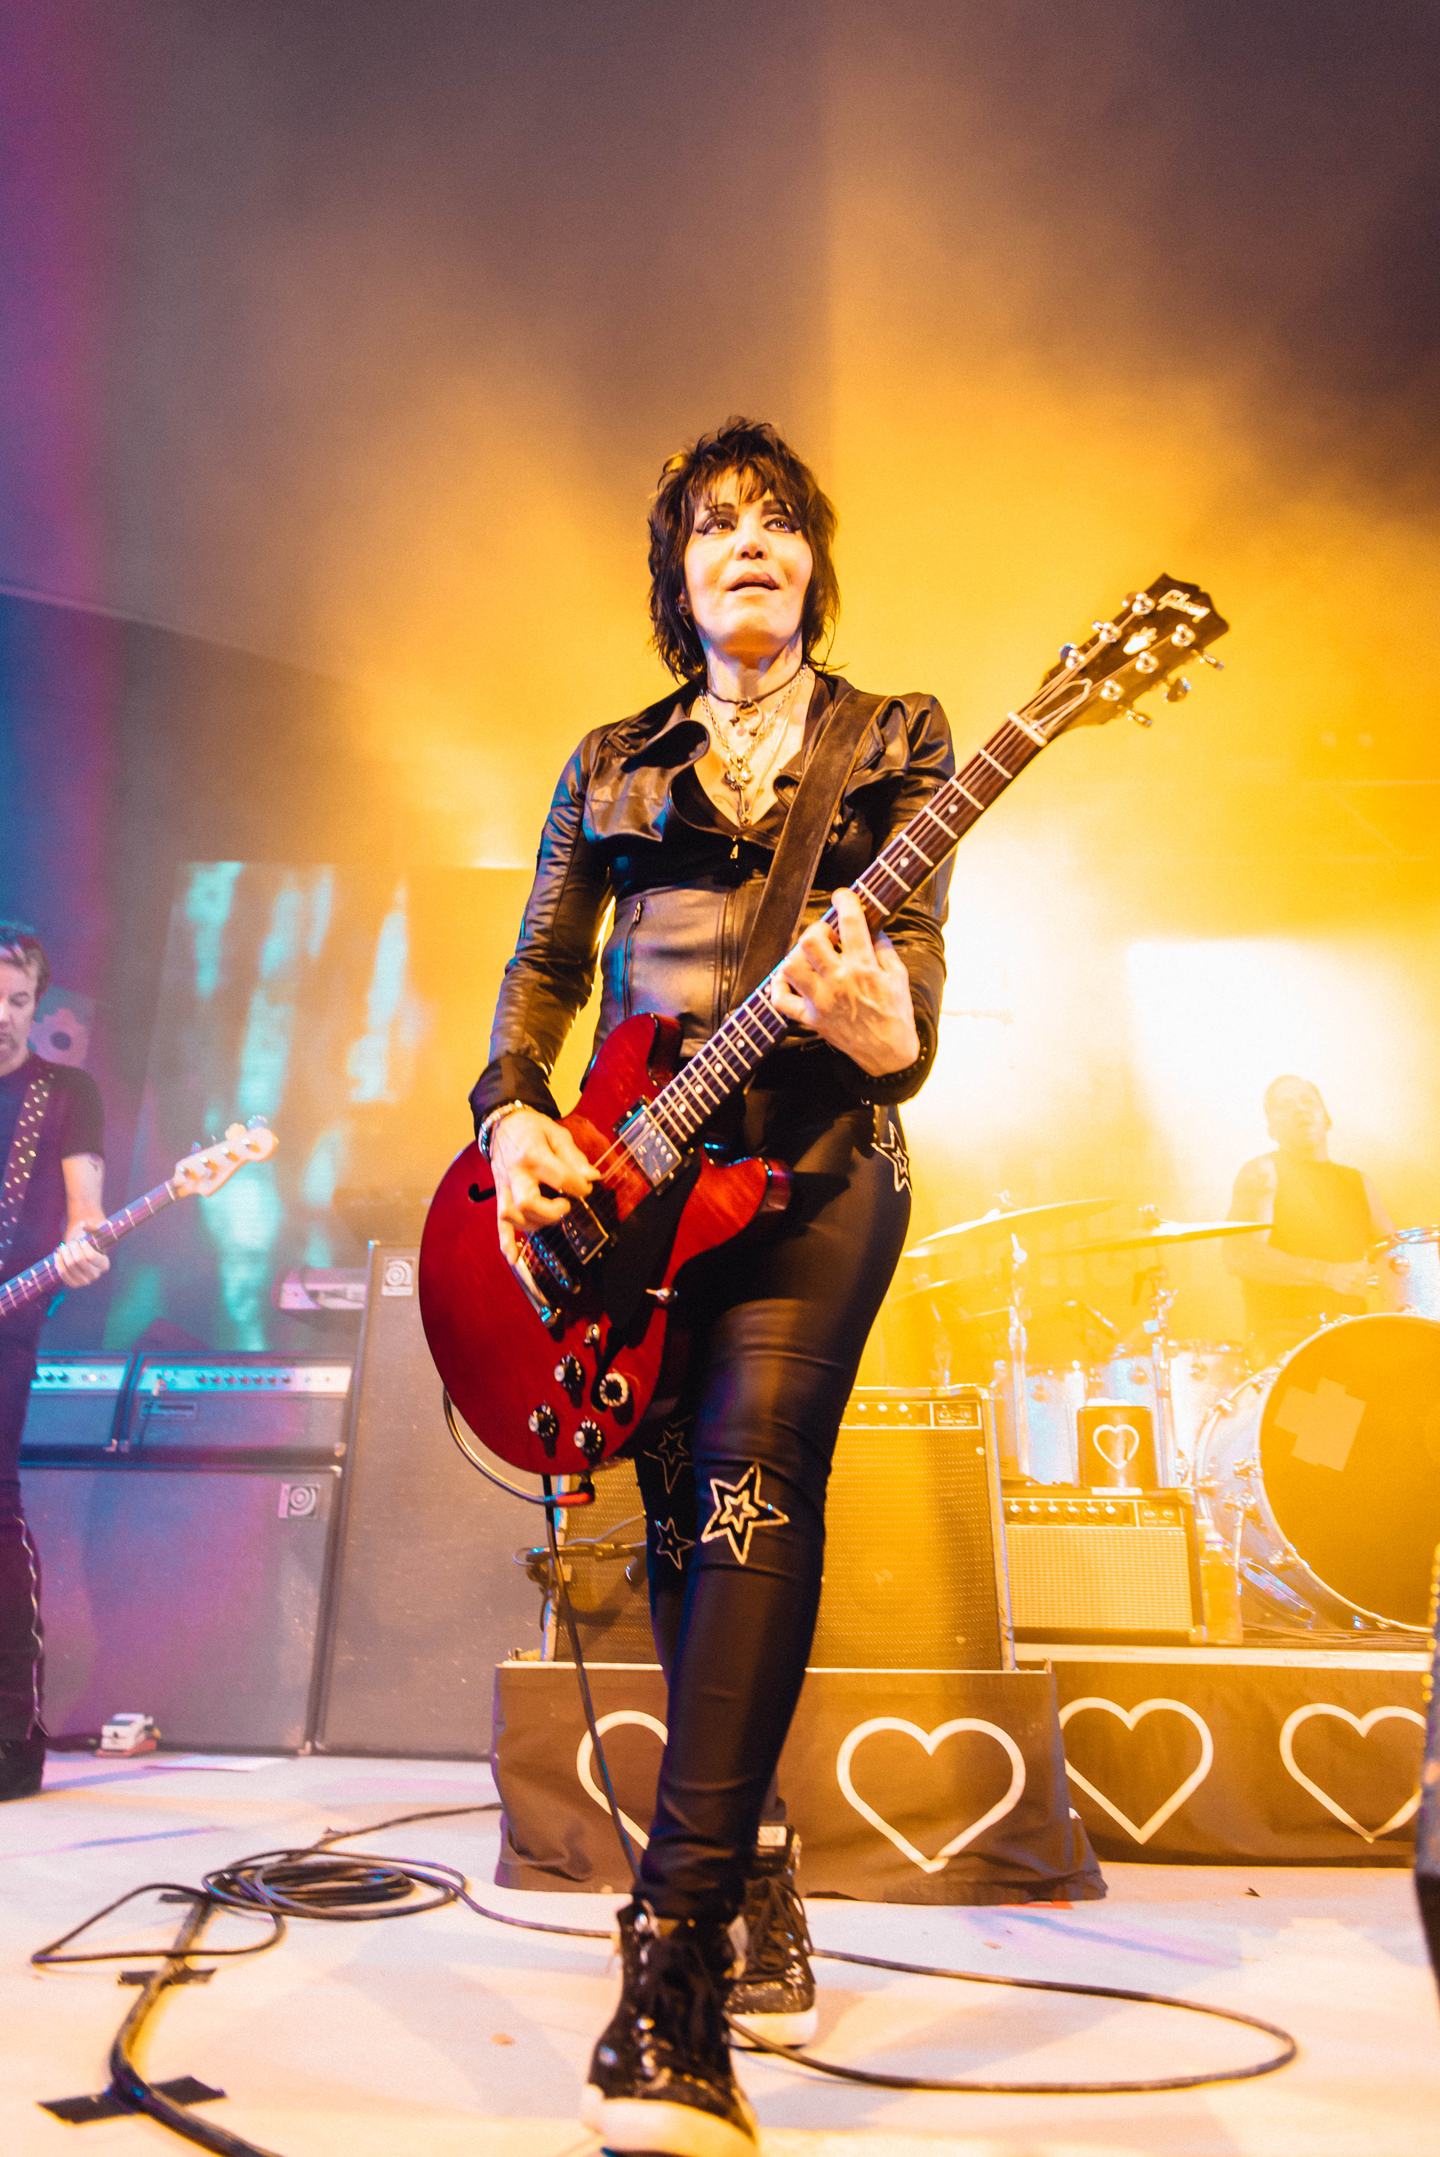 Joan Jett performs at the SXSW Interactive Bash presented by Media Temple at Stubb's.